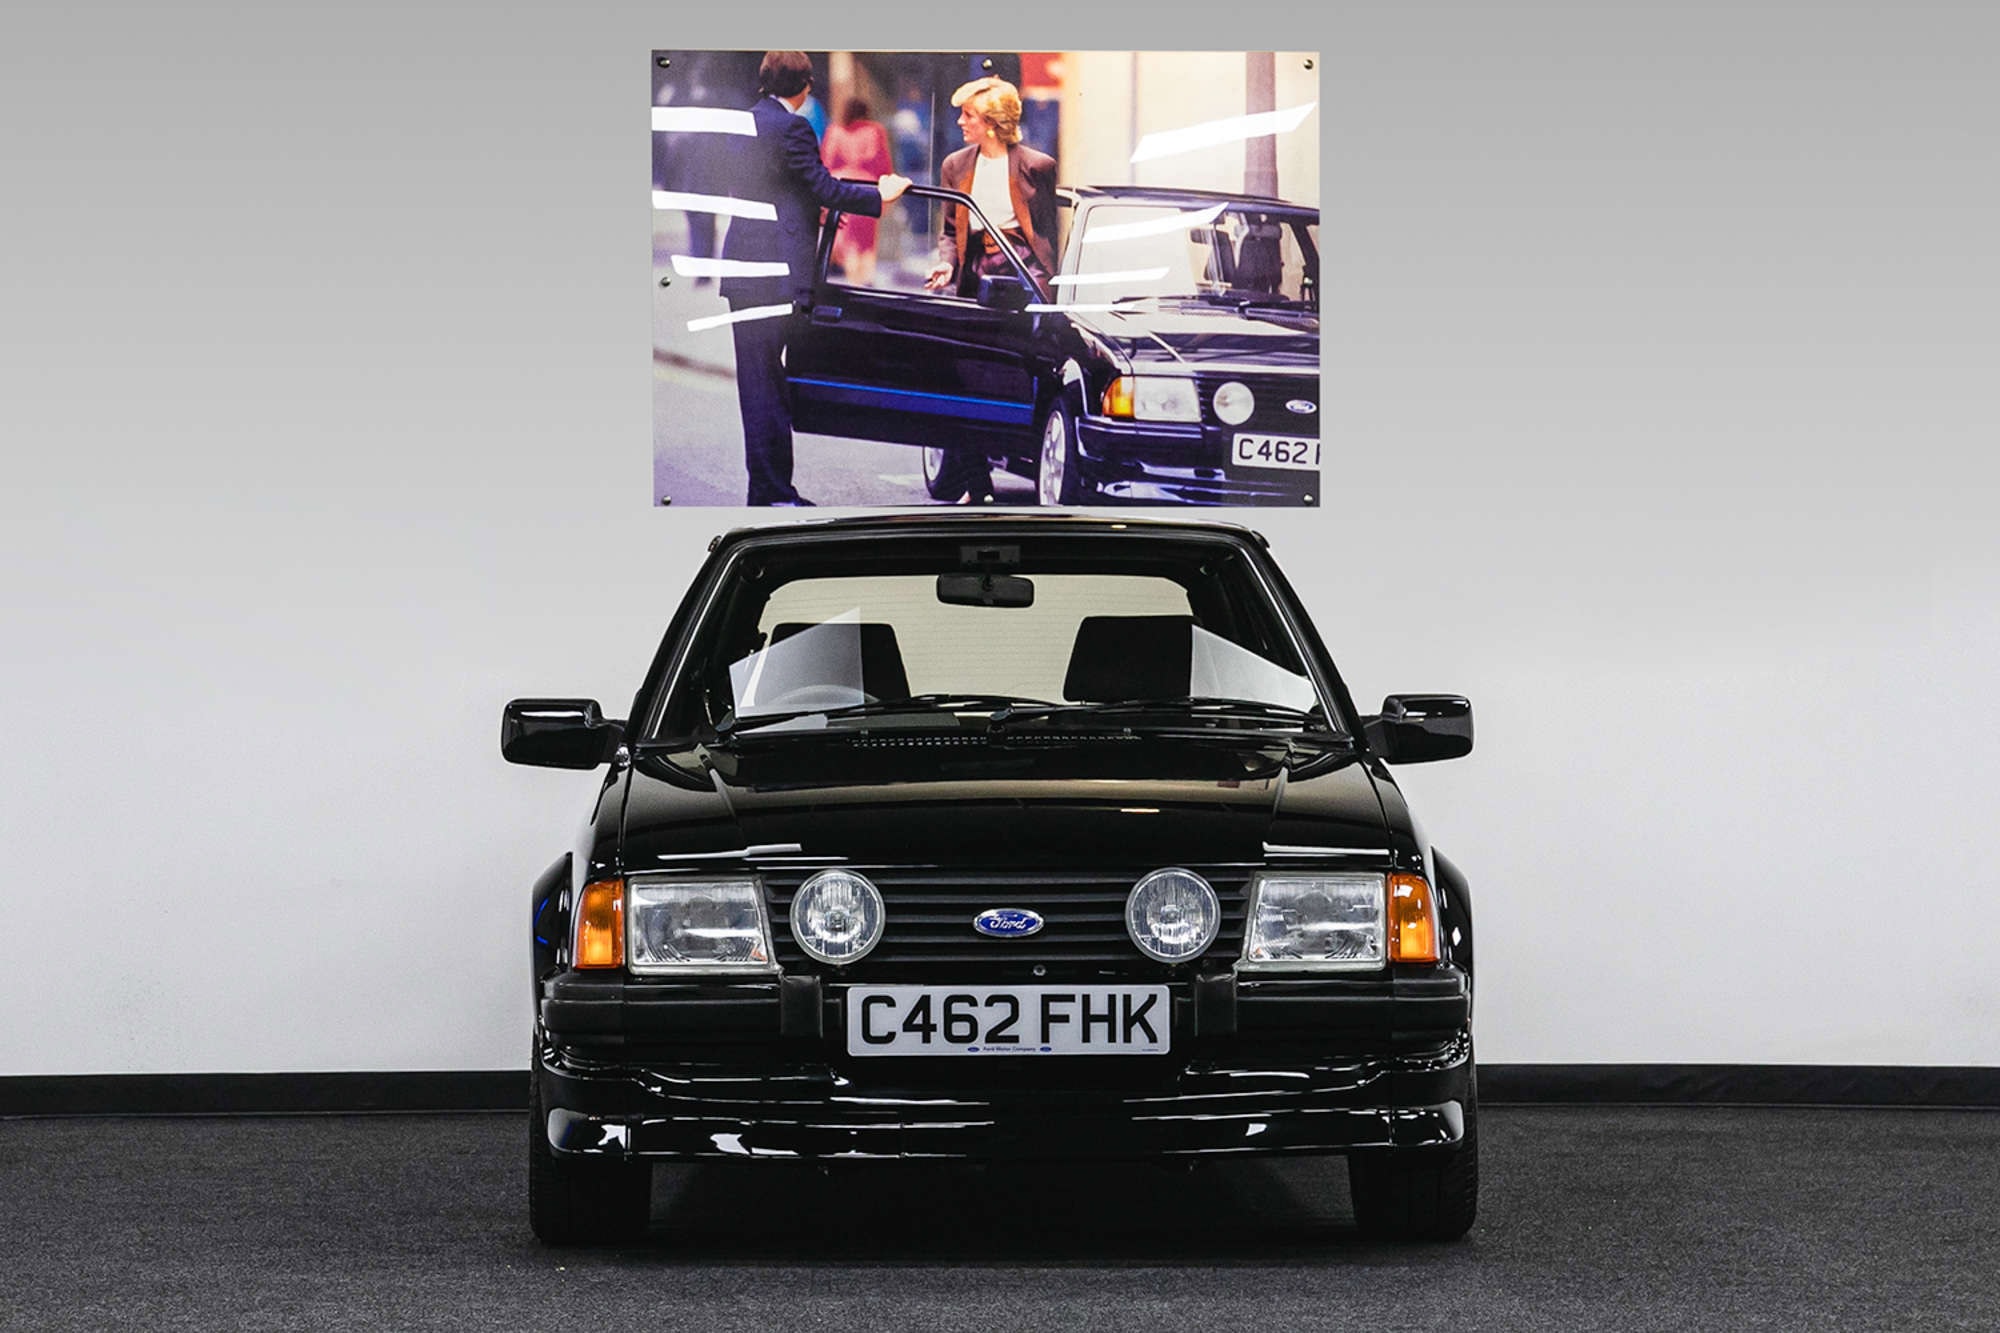 silverstone auctions Diana Princess of Wales 1985 Ford Escort RS Turbo S1 auction Essex royalty UK sports cars  